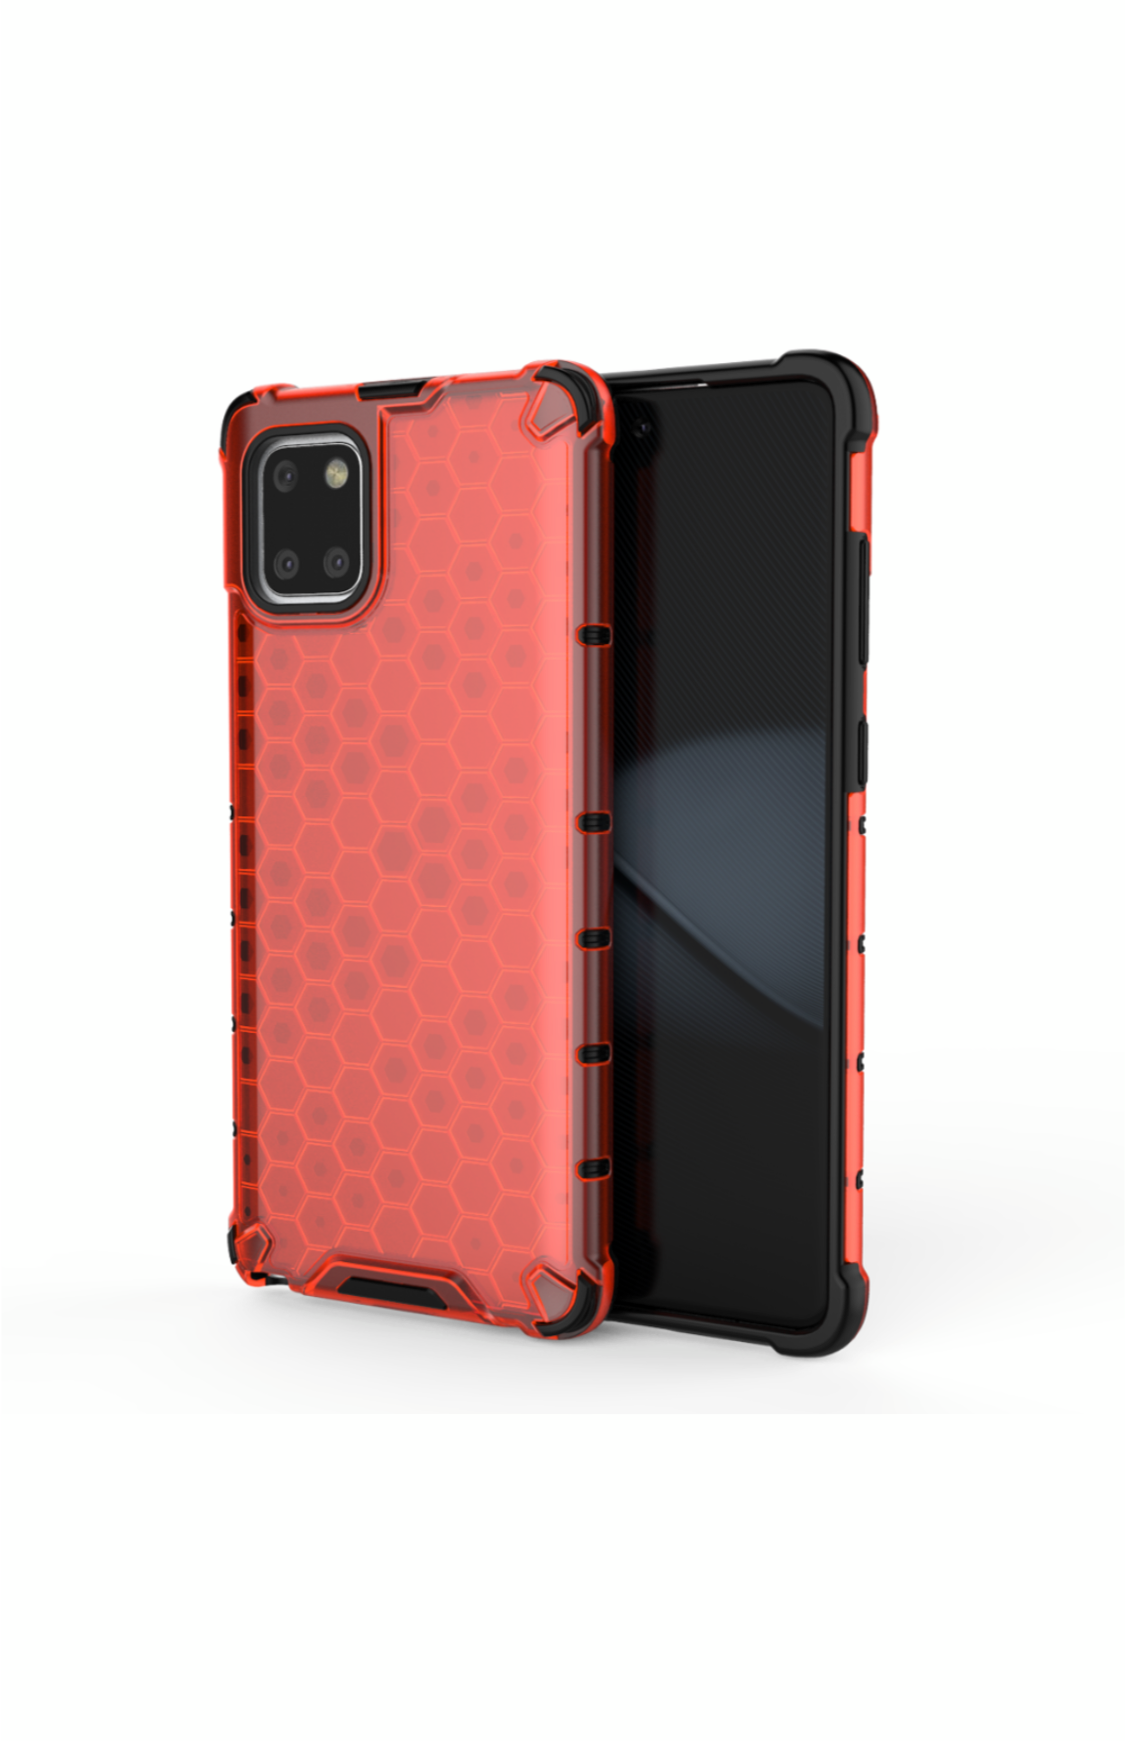 Samsung Galaxy Note 10 Lite Shockproof Honeycomb Cover